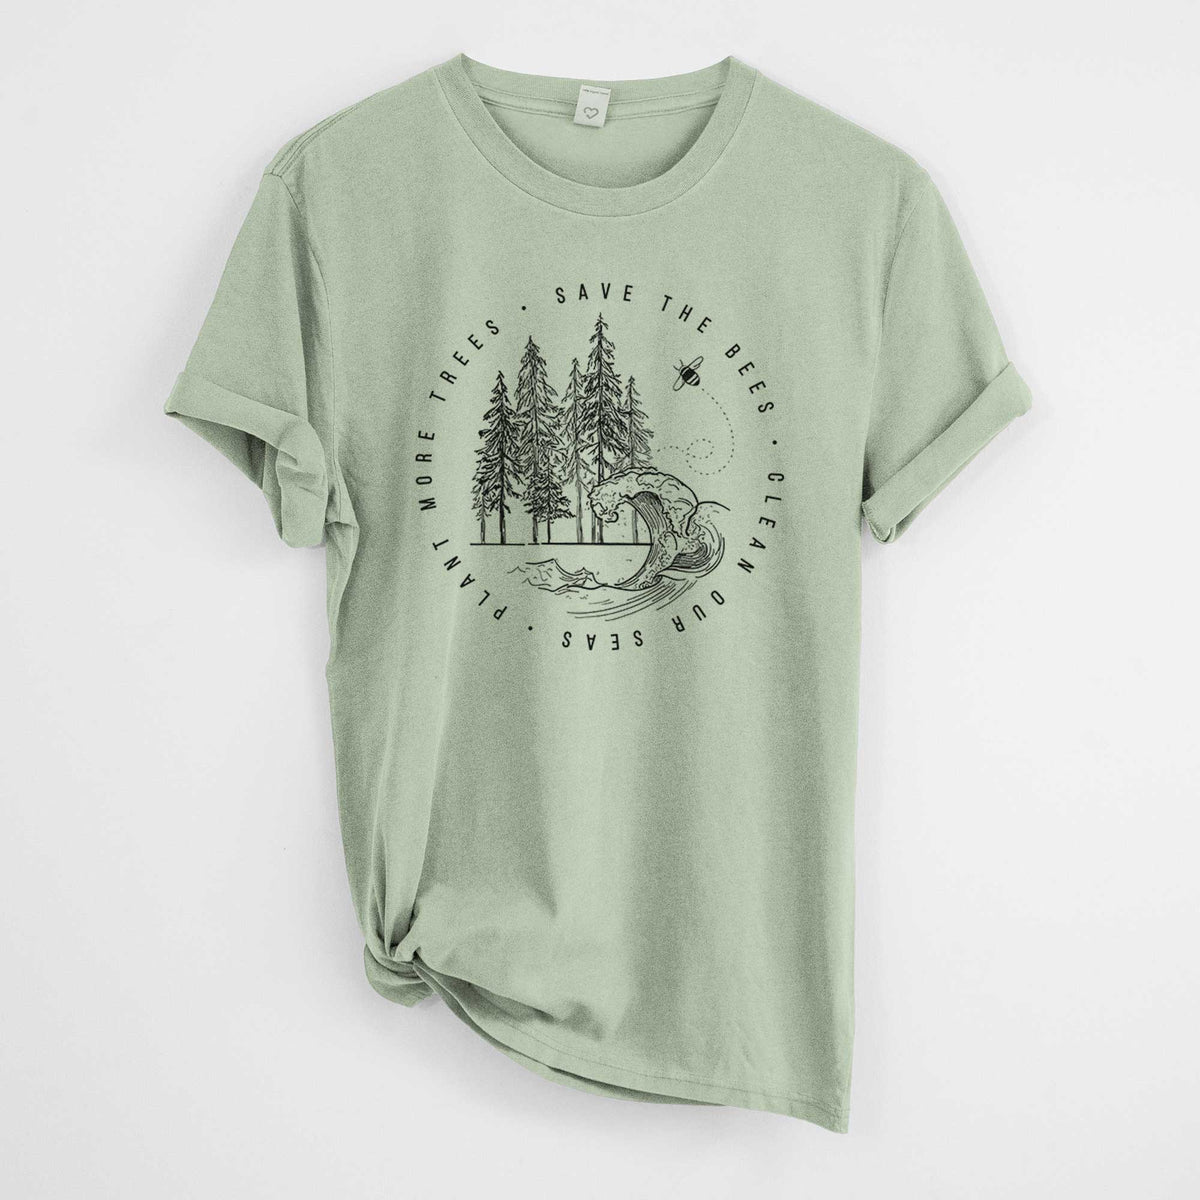 Save the Bees, Clean our Seas, Plant more Trees -  Mineral Wash 100% Organic Cotton Short Sleeve